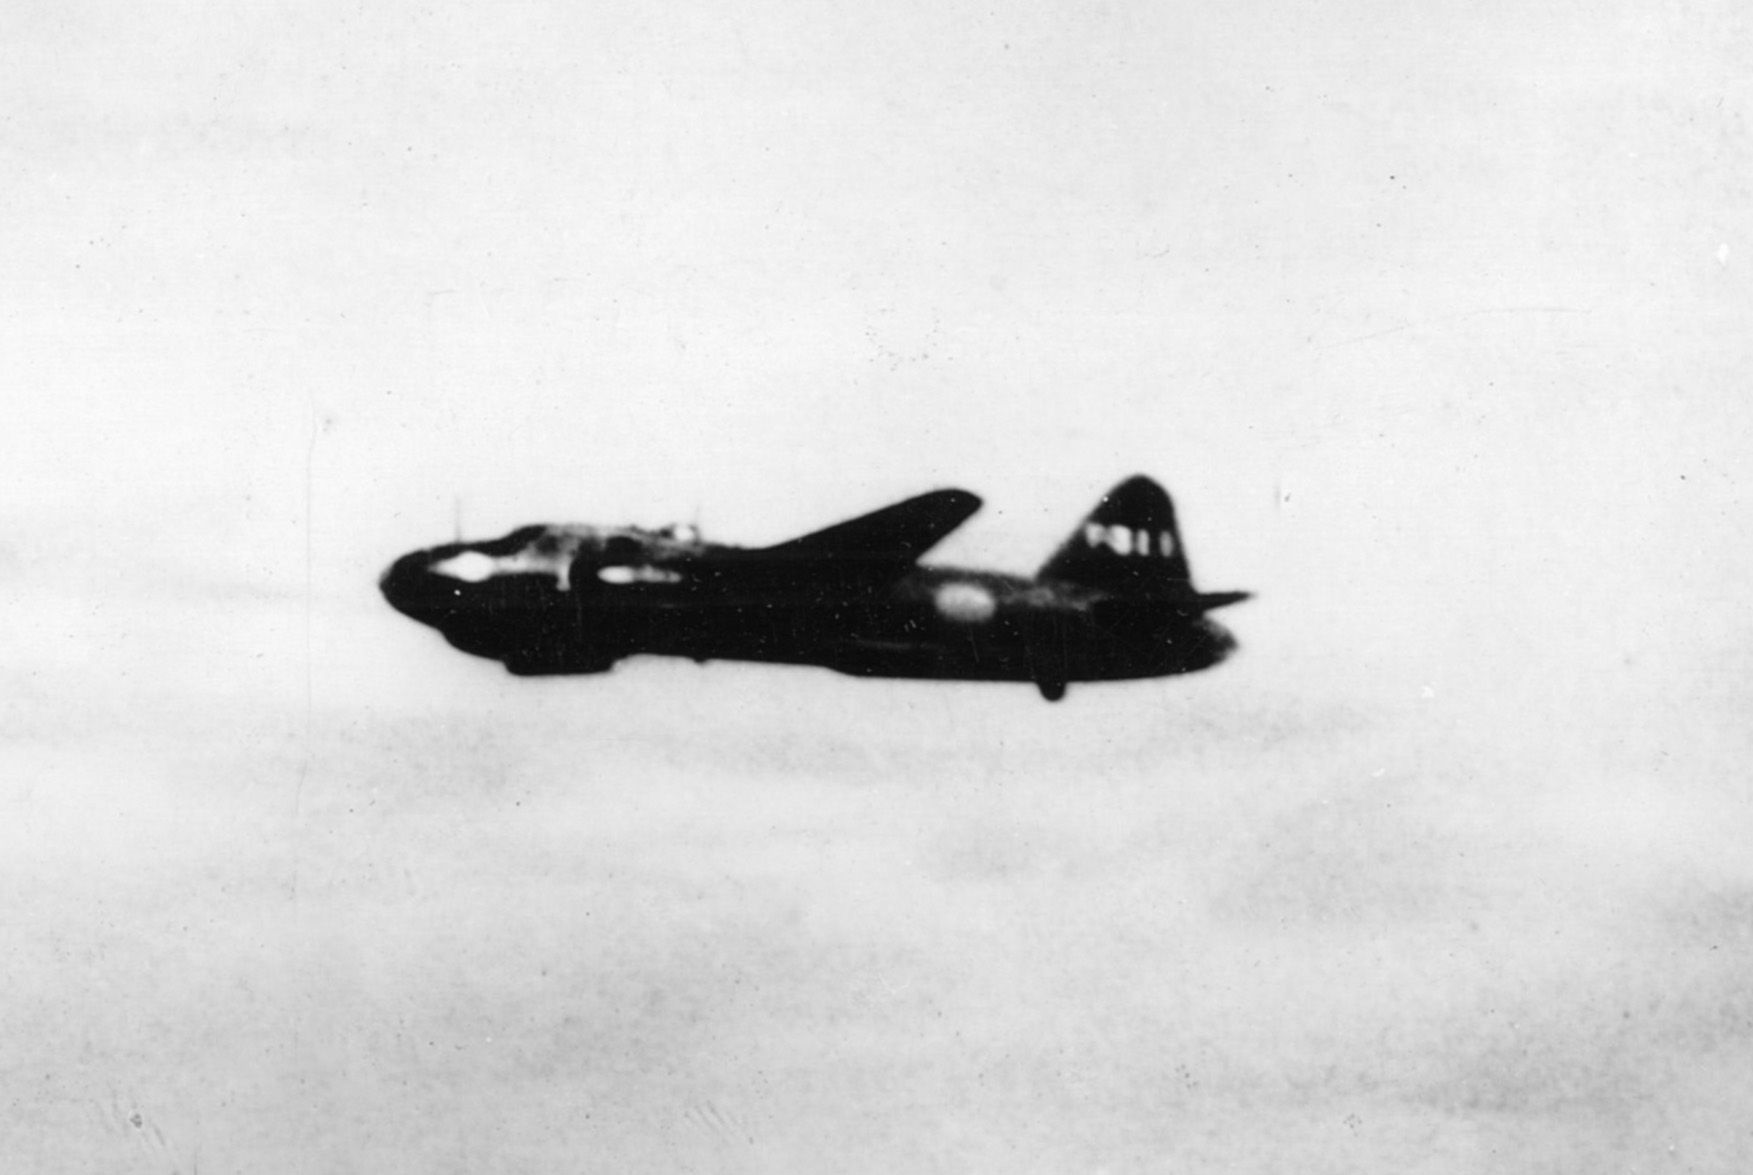 A Japanese Mitsubishi “Betty” bomber is photographed from the Chicago on July 7, 1942. The versatile Betty could carry torpedoes or bombs.